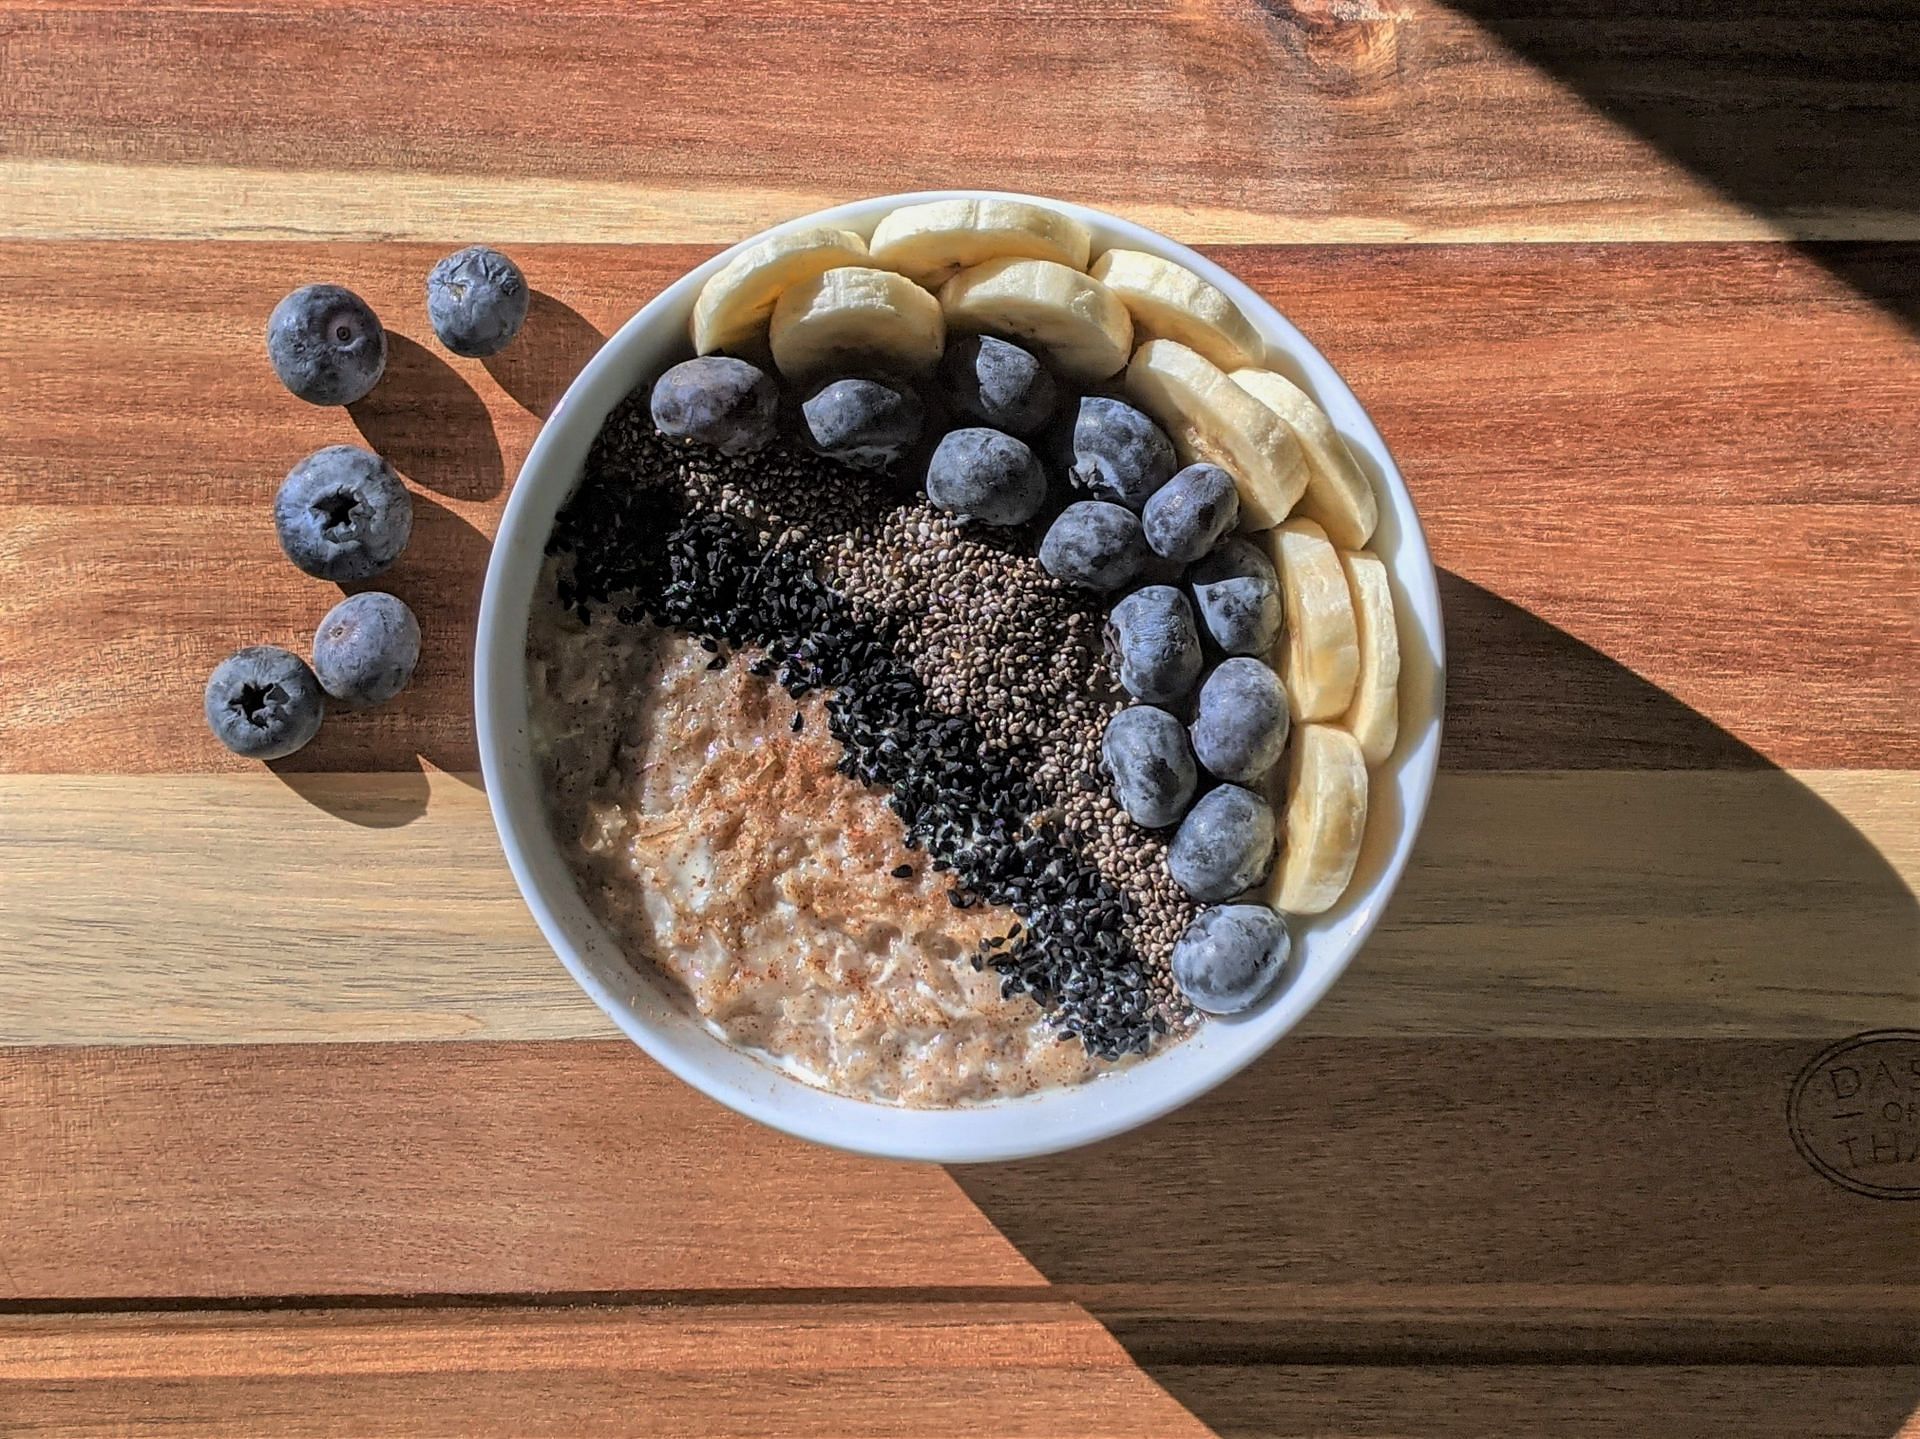 Oatmeal is a great choice for breakfast as it is rich in iron and magnesium. (Image via Unsplash / Susan Willkinson)